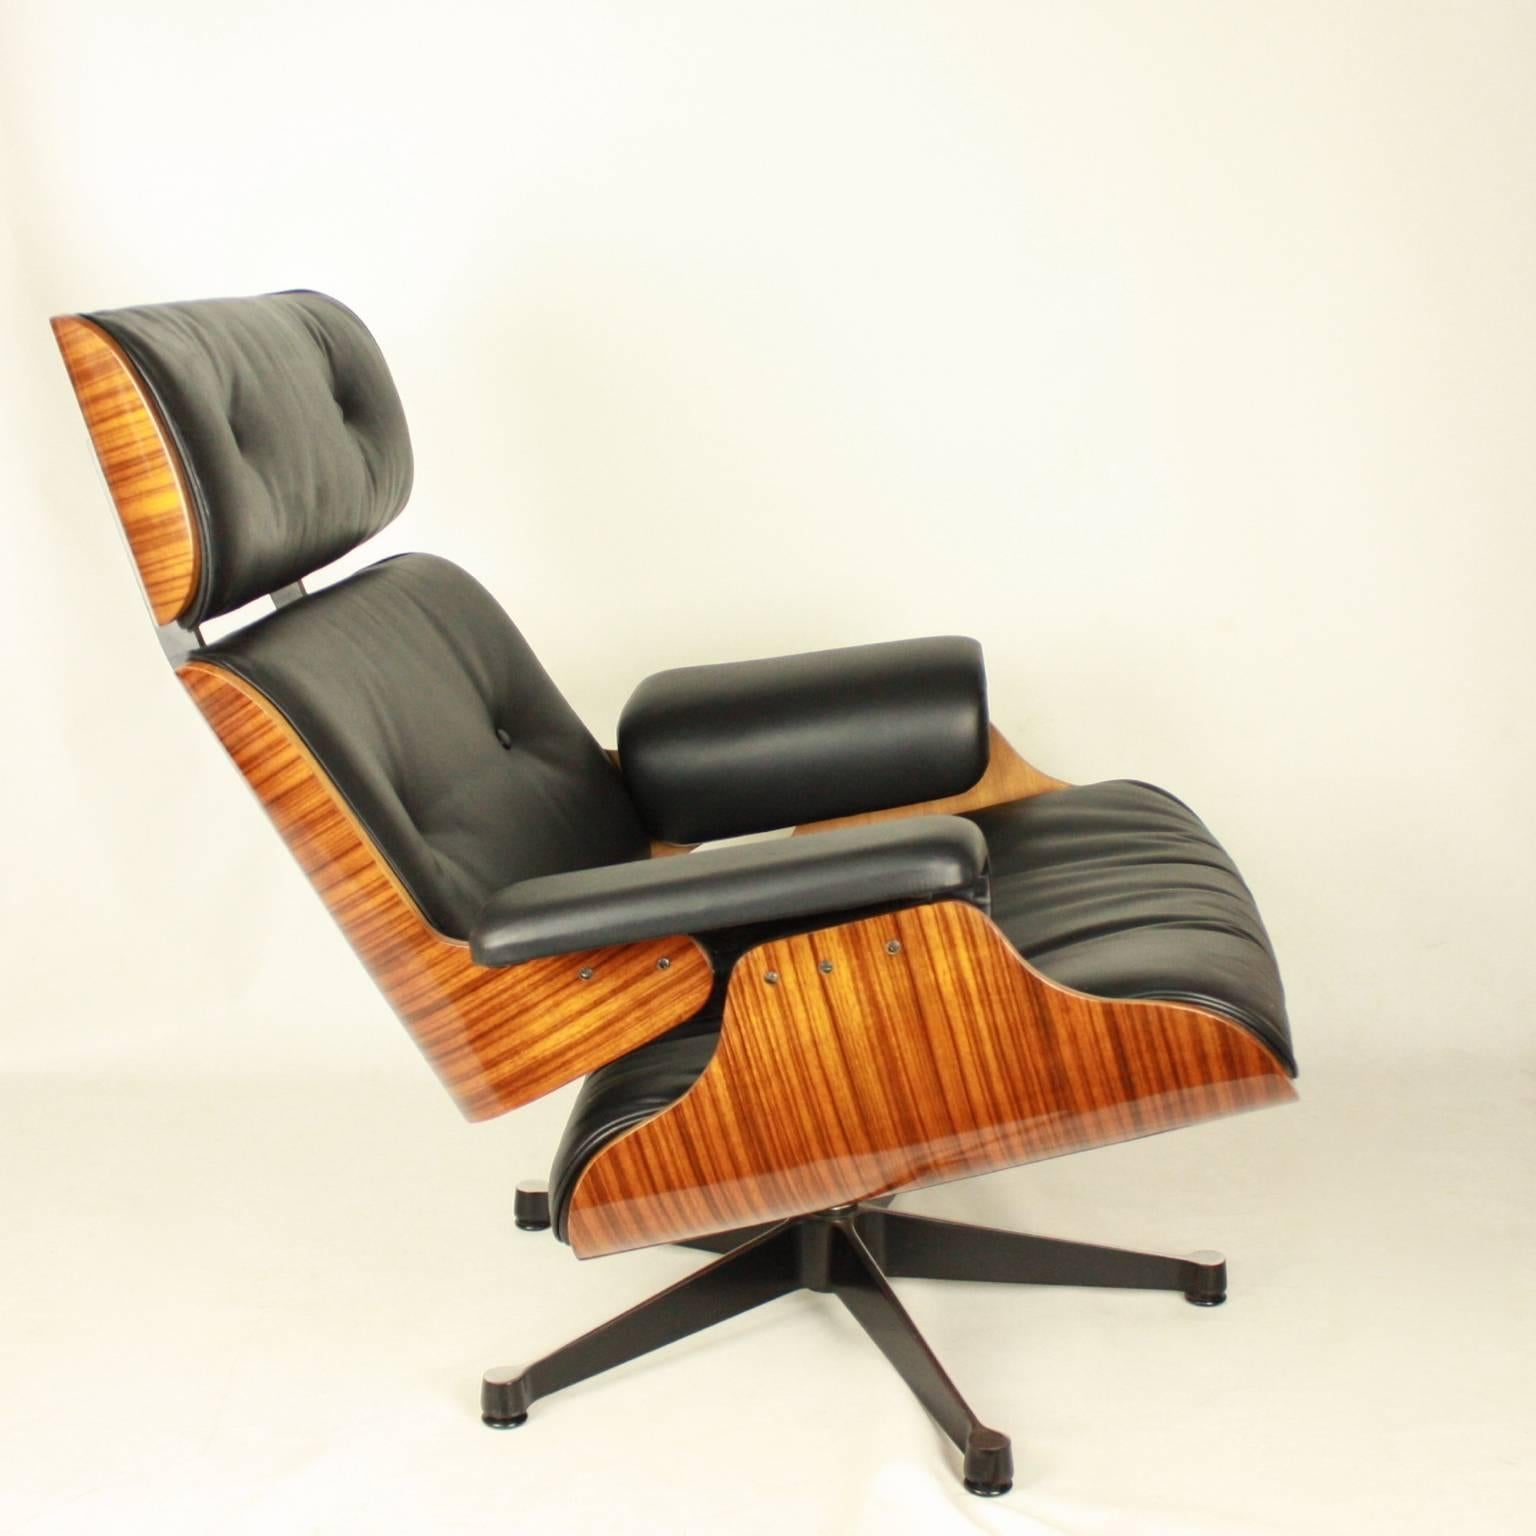 American Pair of Ray and Charles Eames Style Lounge Chair with One Ottoman